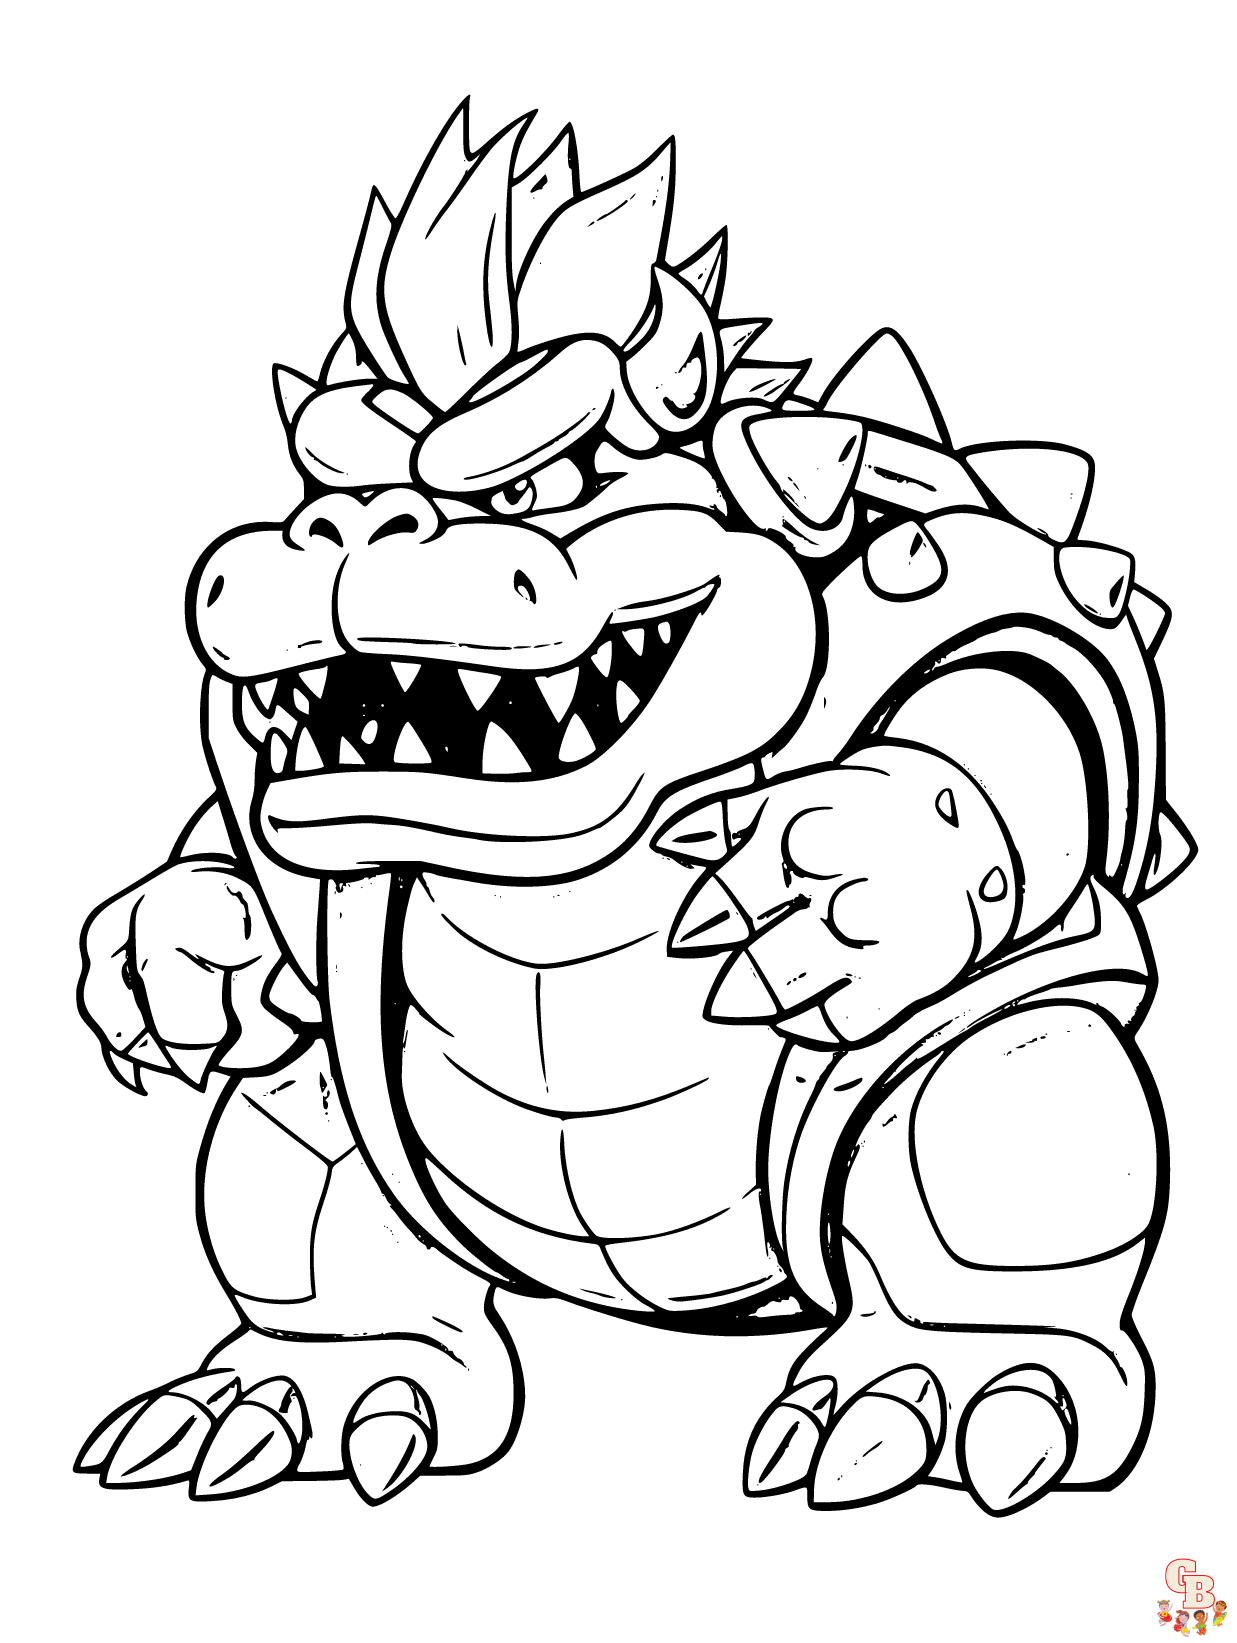 Free Bowser coloring pages for kids